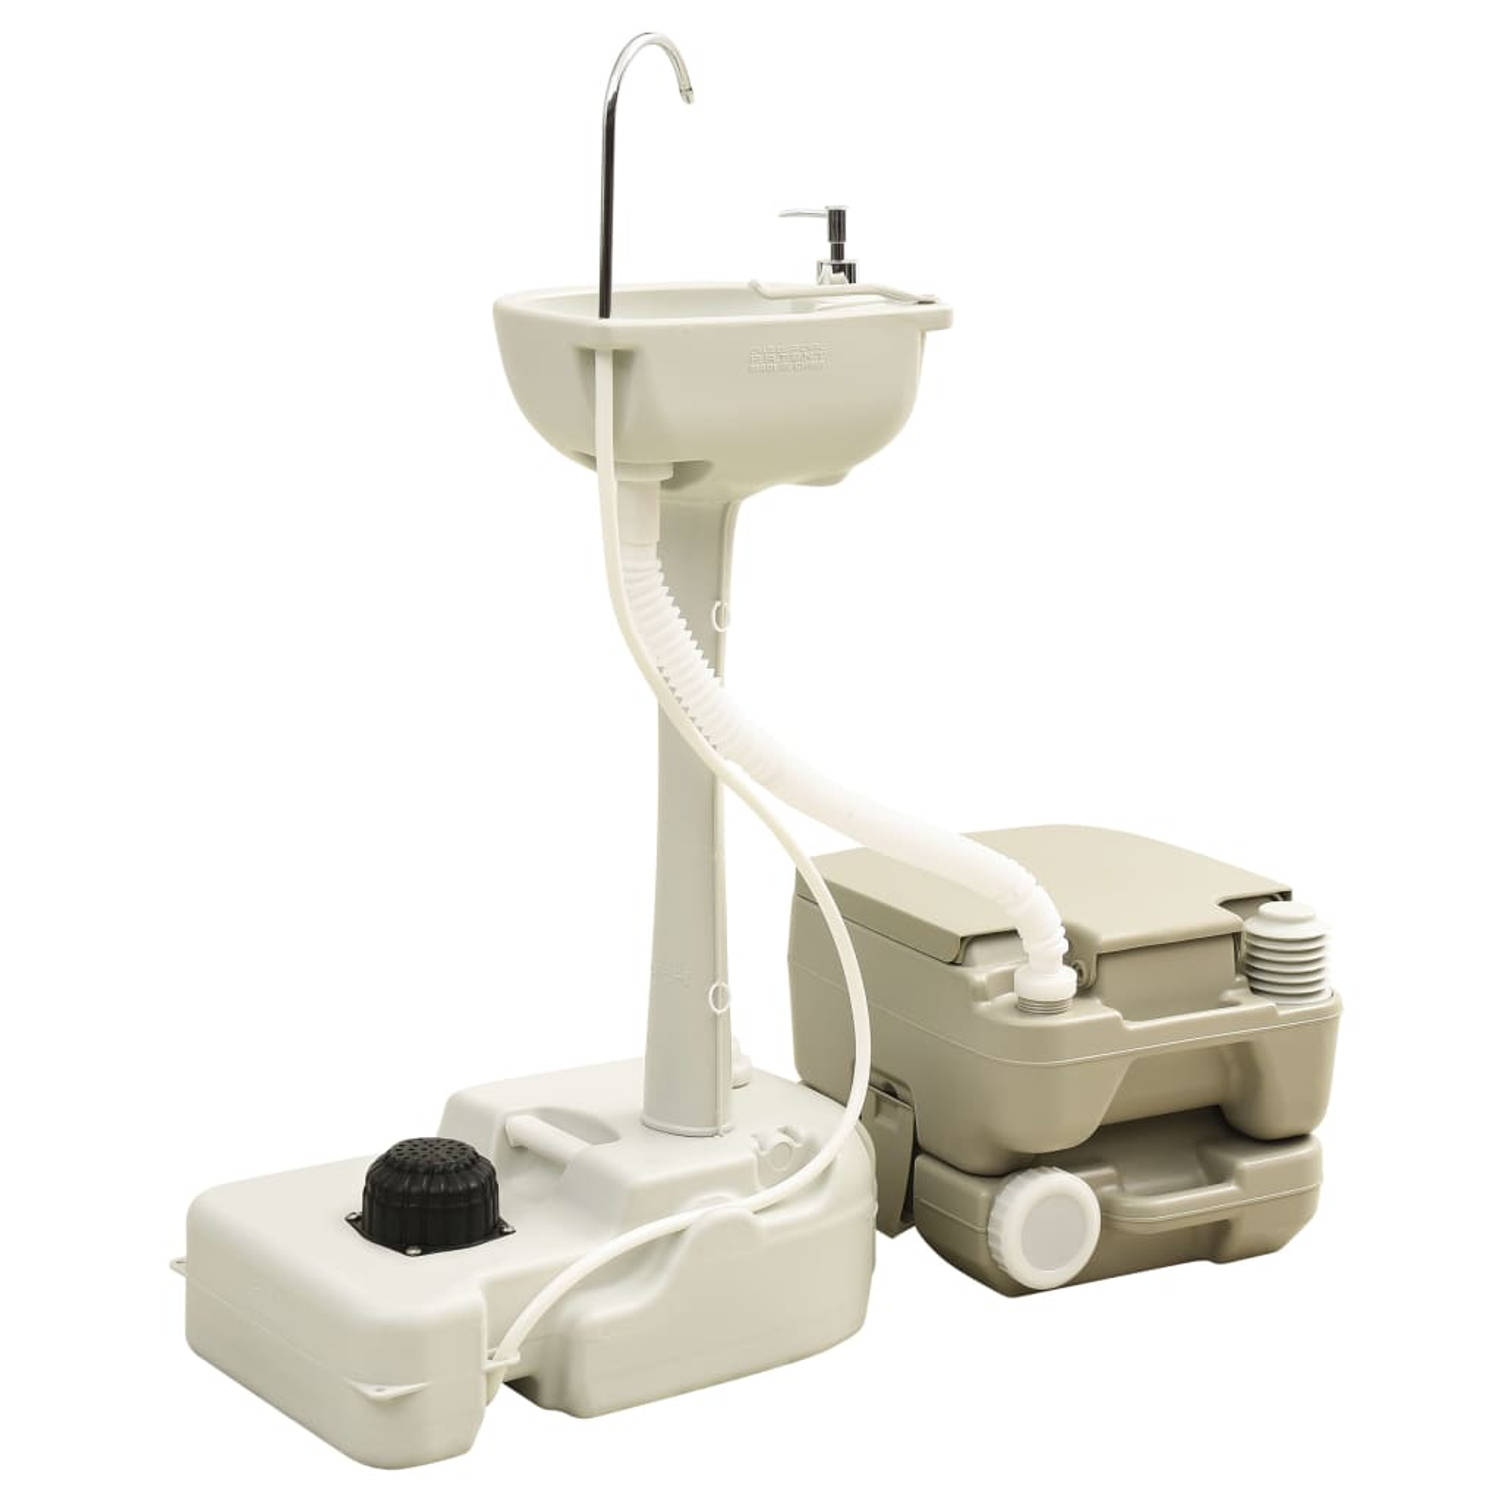 The Living Store Campingtoilet HDPE-PP 41.5x36.5x30cm - 10L afvaltank - T-type spoelsysteemThe Living Store